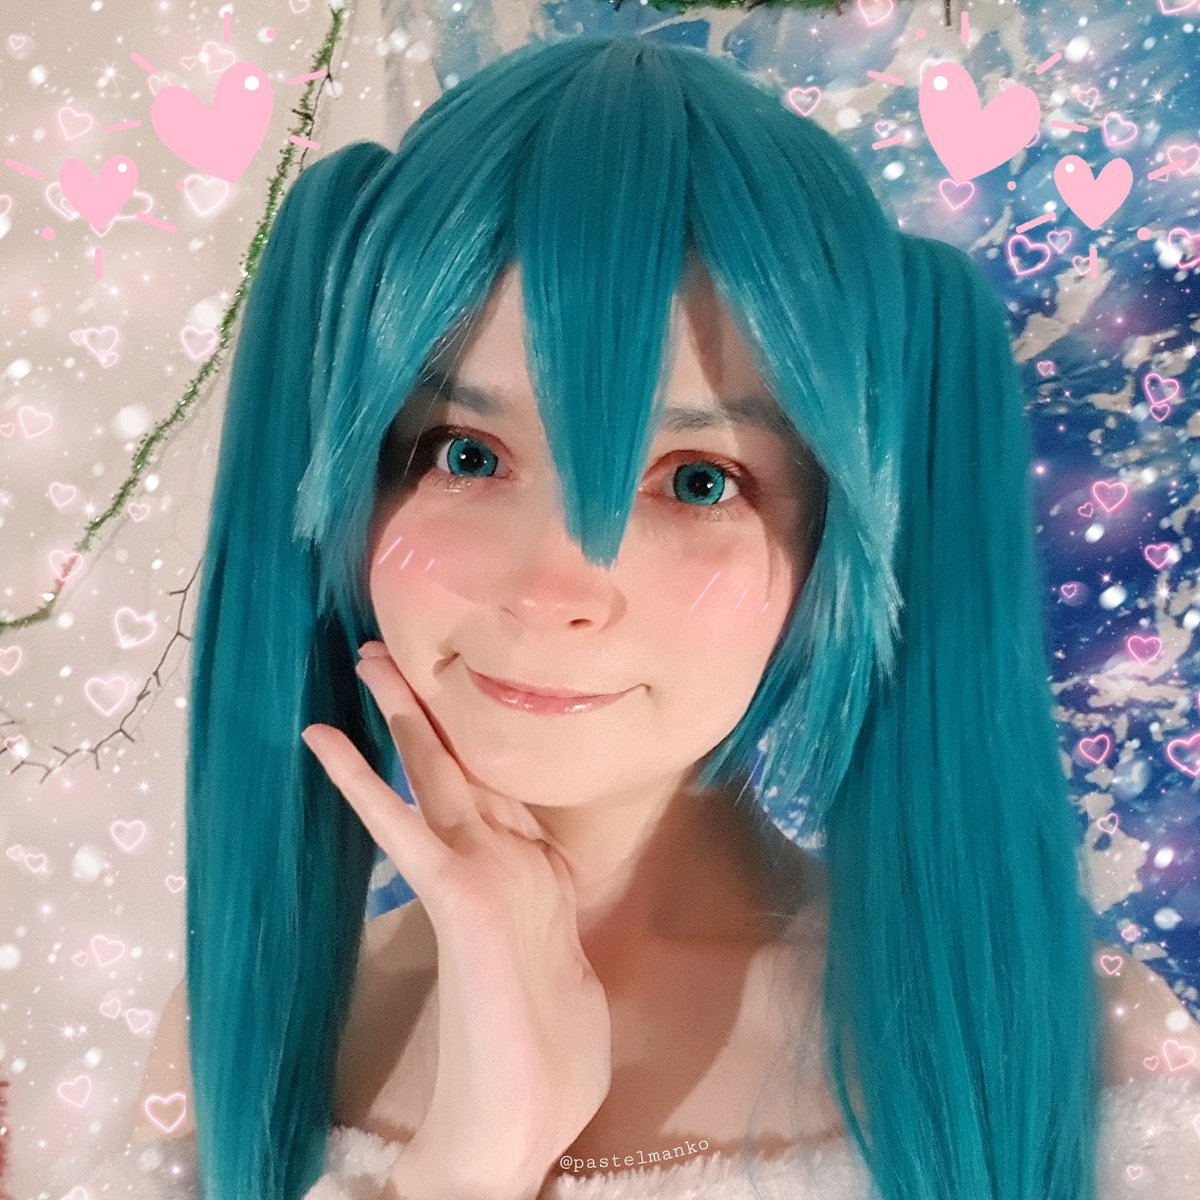 Miku selfie 💙
I dunno how tags work on twitter 😅

#mikucosplay #hatsunemikucosplay #vocaloidcosplay #vocaloidcosplayer #ukcosplay #ukcosplayer #animecosplay #cosplay #coscraft #VOCALOID  #kawaiigirl #hatsunemiku  #初音ミク #ミク #コスプレ #ボーカロイド #virtualsinger